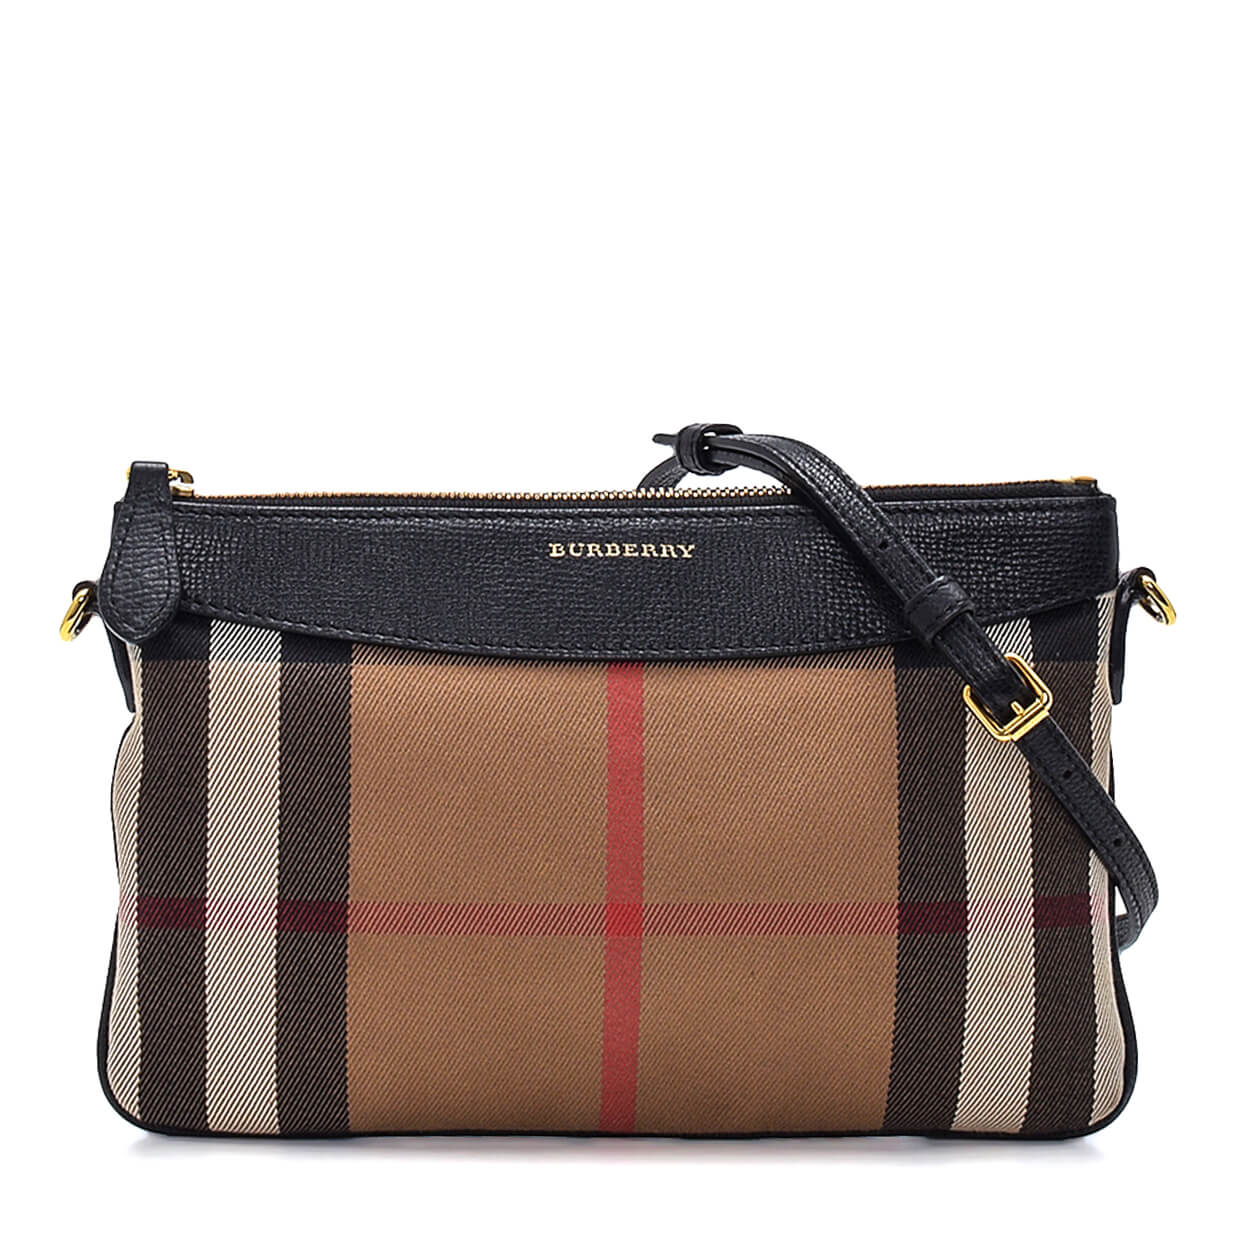 Burberry - Beige Canvas House Check & Black Leather Trimmed Crossbody Bag